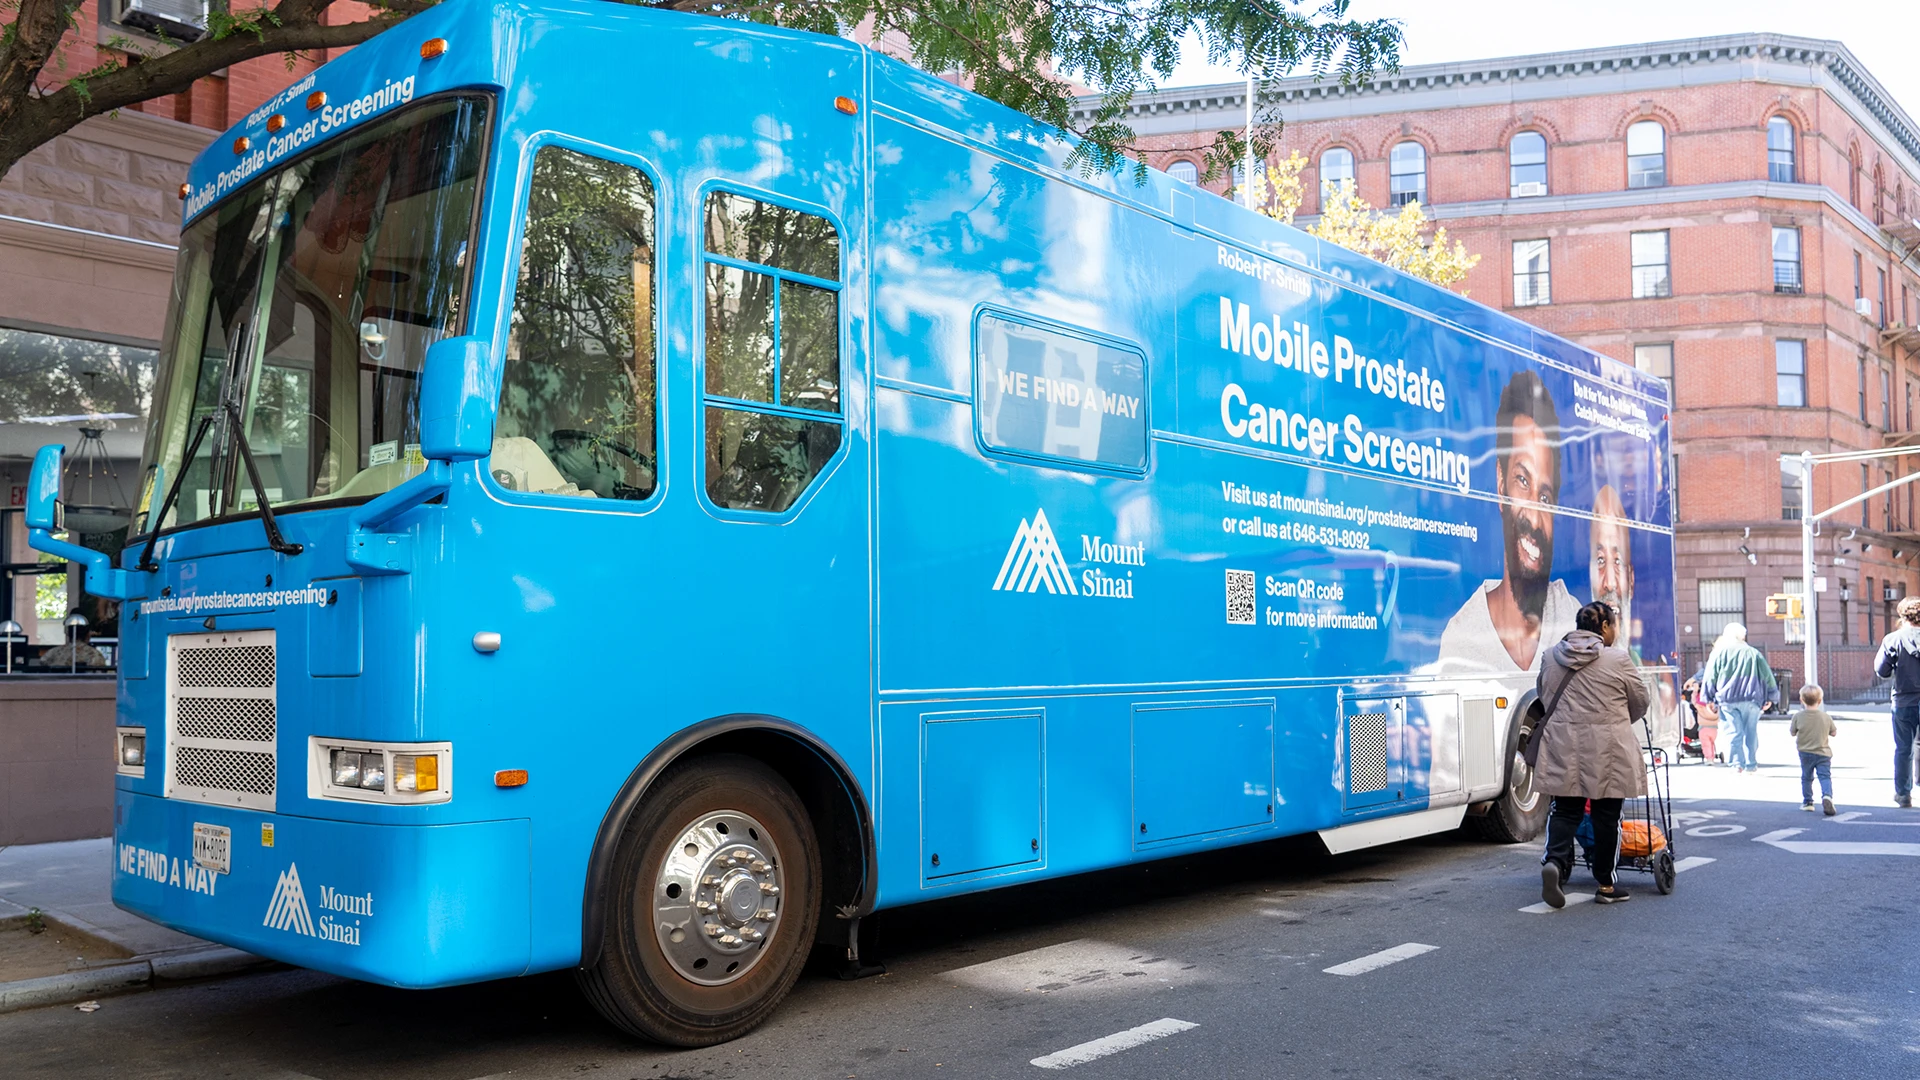 The Mount Sinai Robert F. Smith Mobile Prostate Cancer Screening Van is a model for a proposed liver cancer screening program.